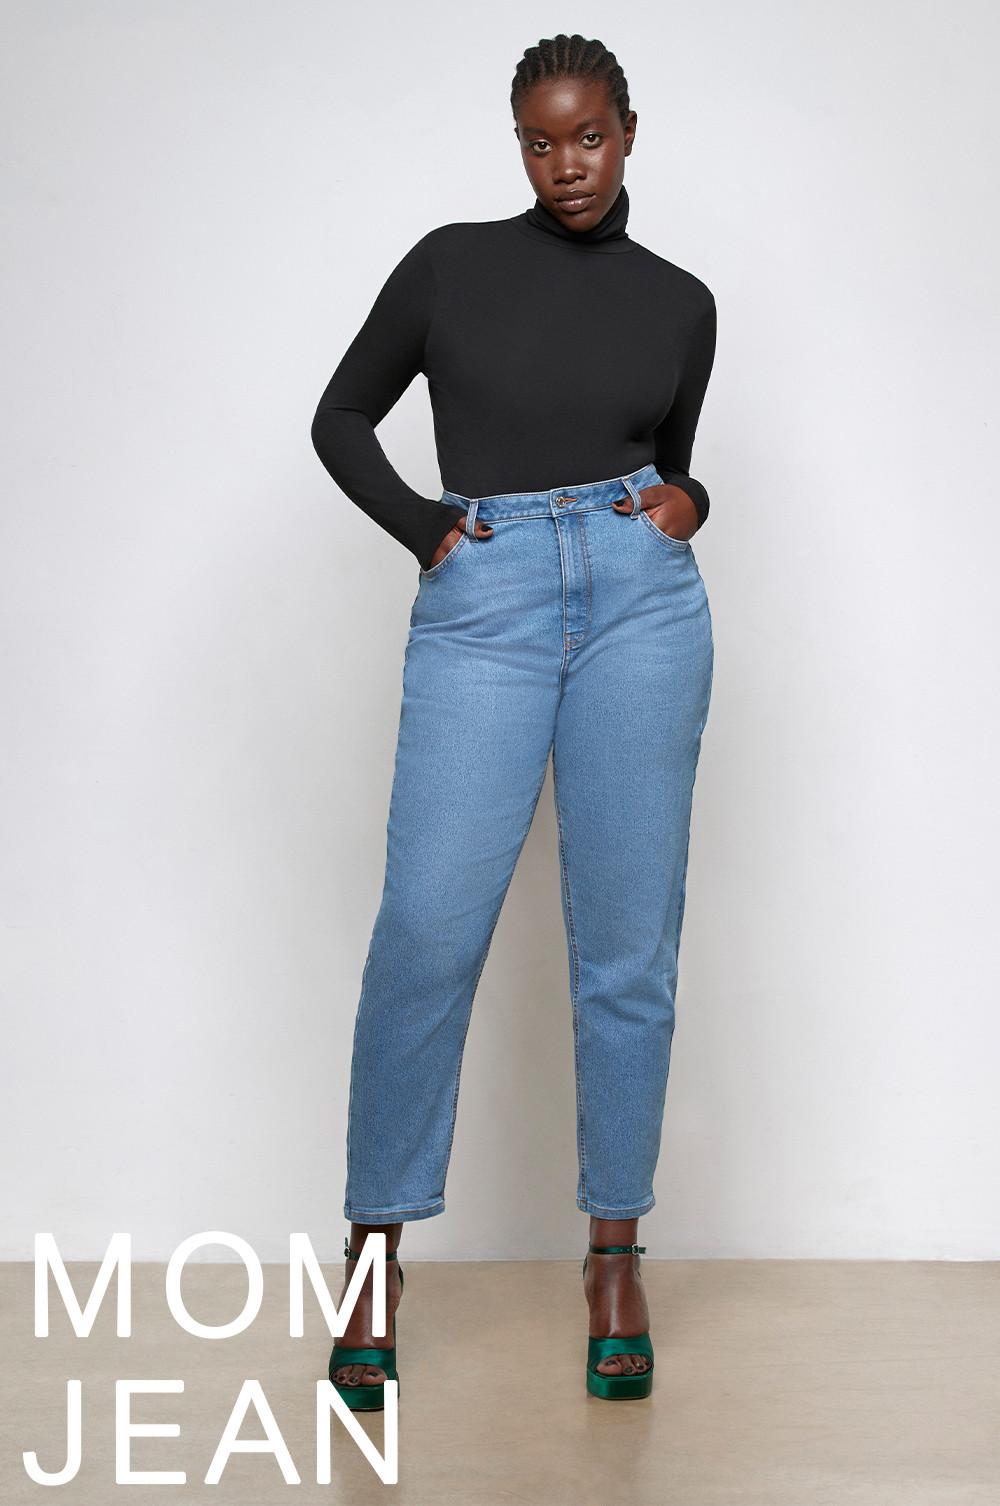 Womens Denim Jeans Fit Guide